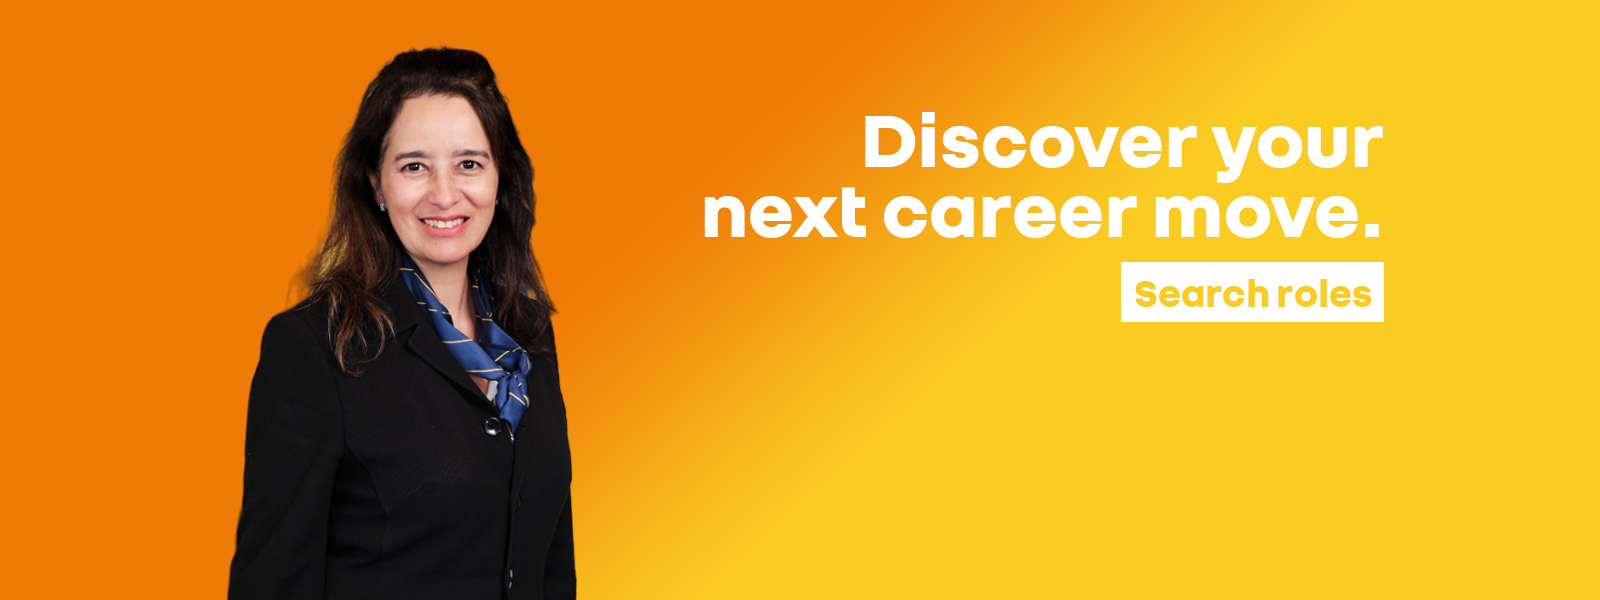 Discover your next career move